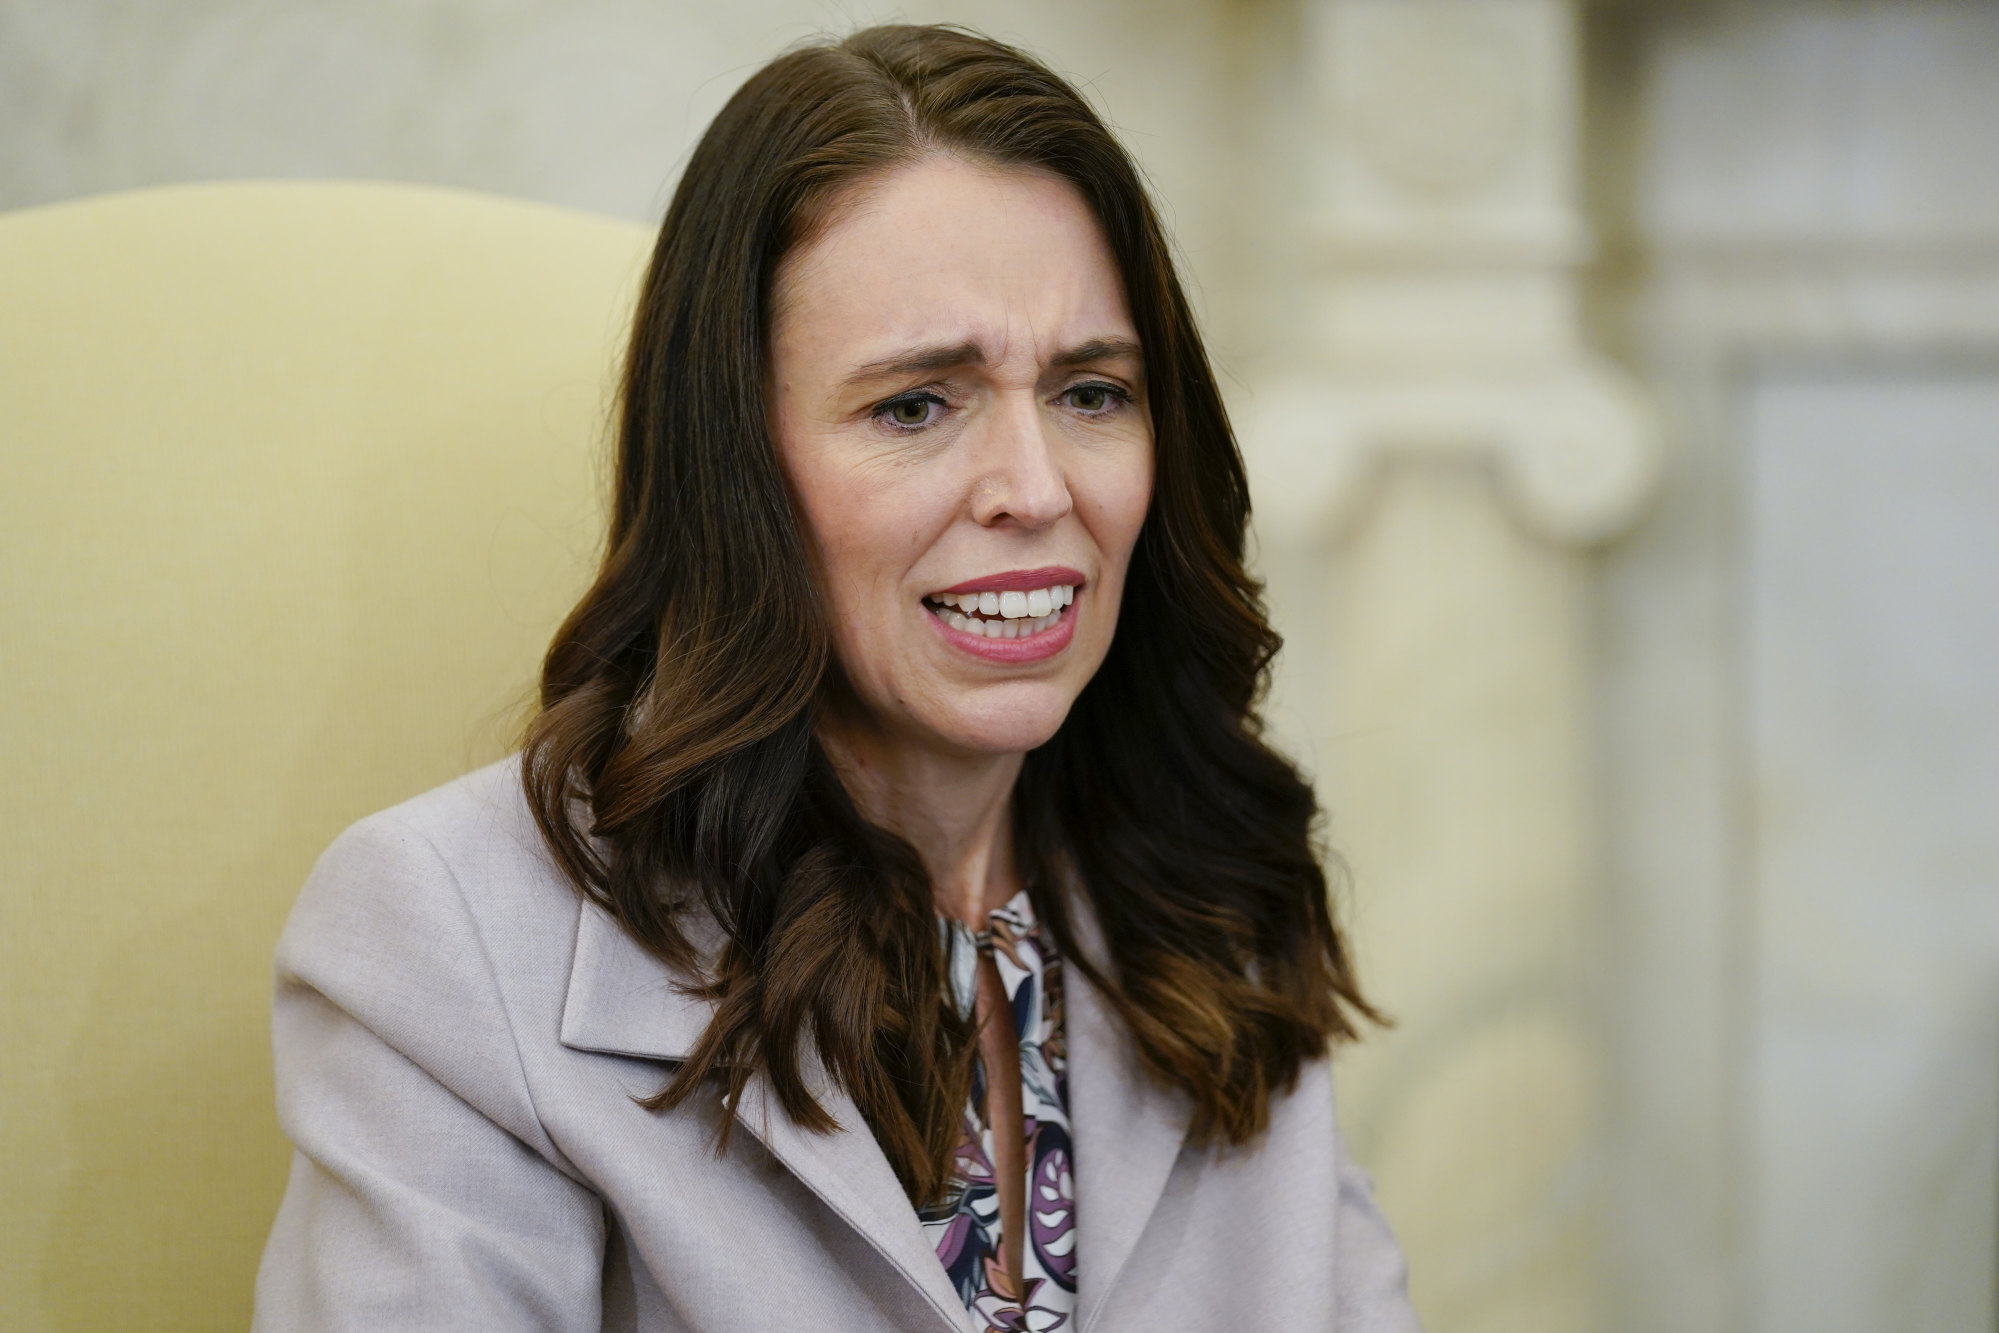 Ardern in the Oval Office of the White House on Tuesday. Photo: AP